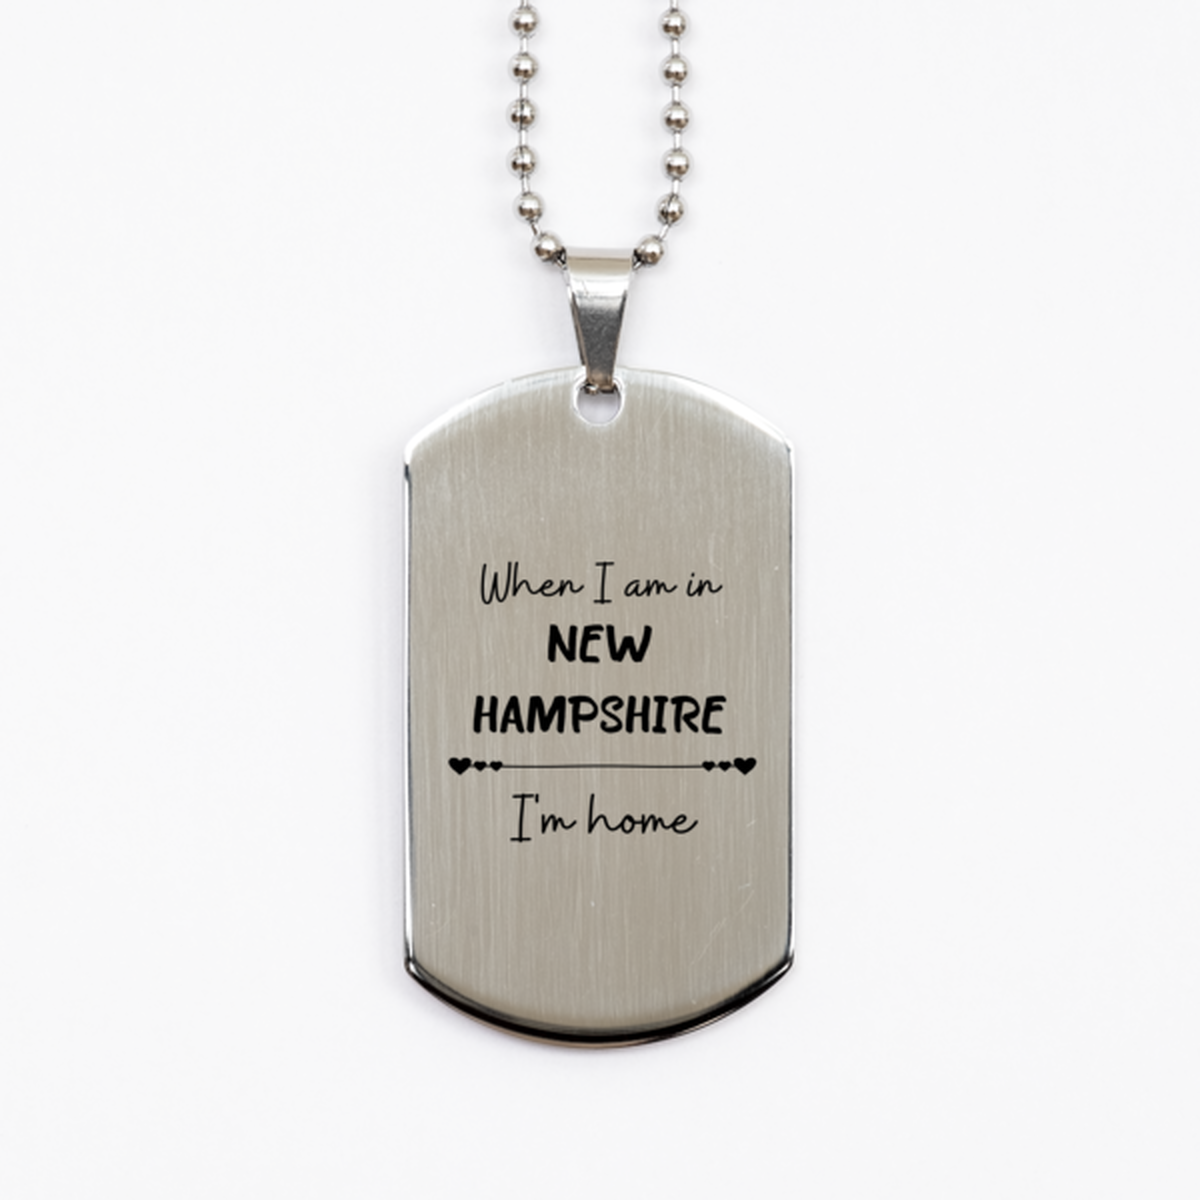 When I am in New Hampshire I'm home Silver Dog Tag, Cheap Gifts For New Hampshire, State New Hampshire Birthday Gifts for Friends Coworker